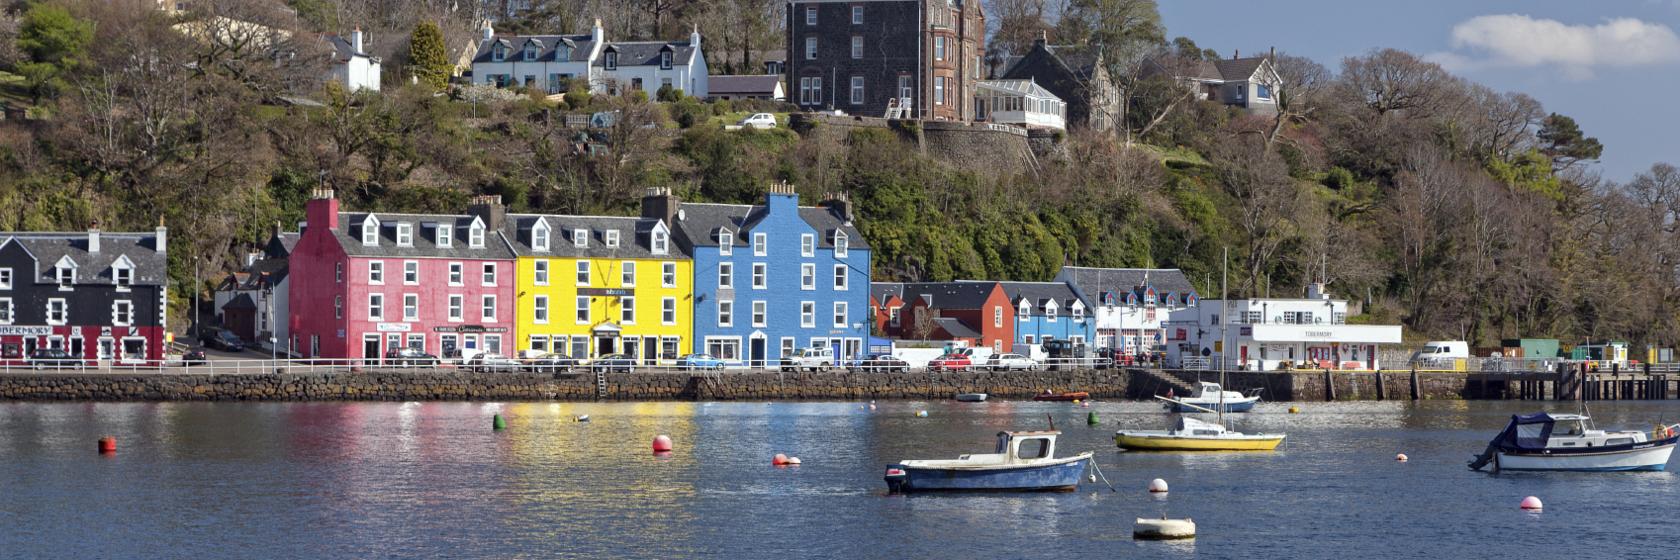 Argyll and Bute, Scotland Hotels